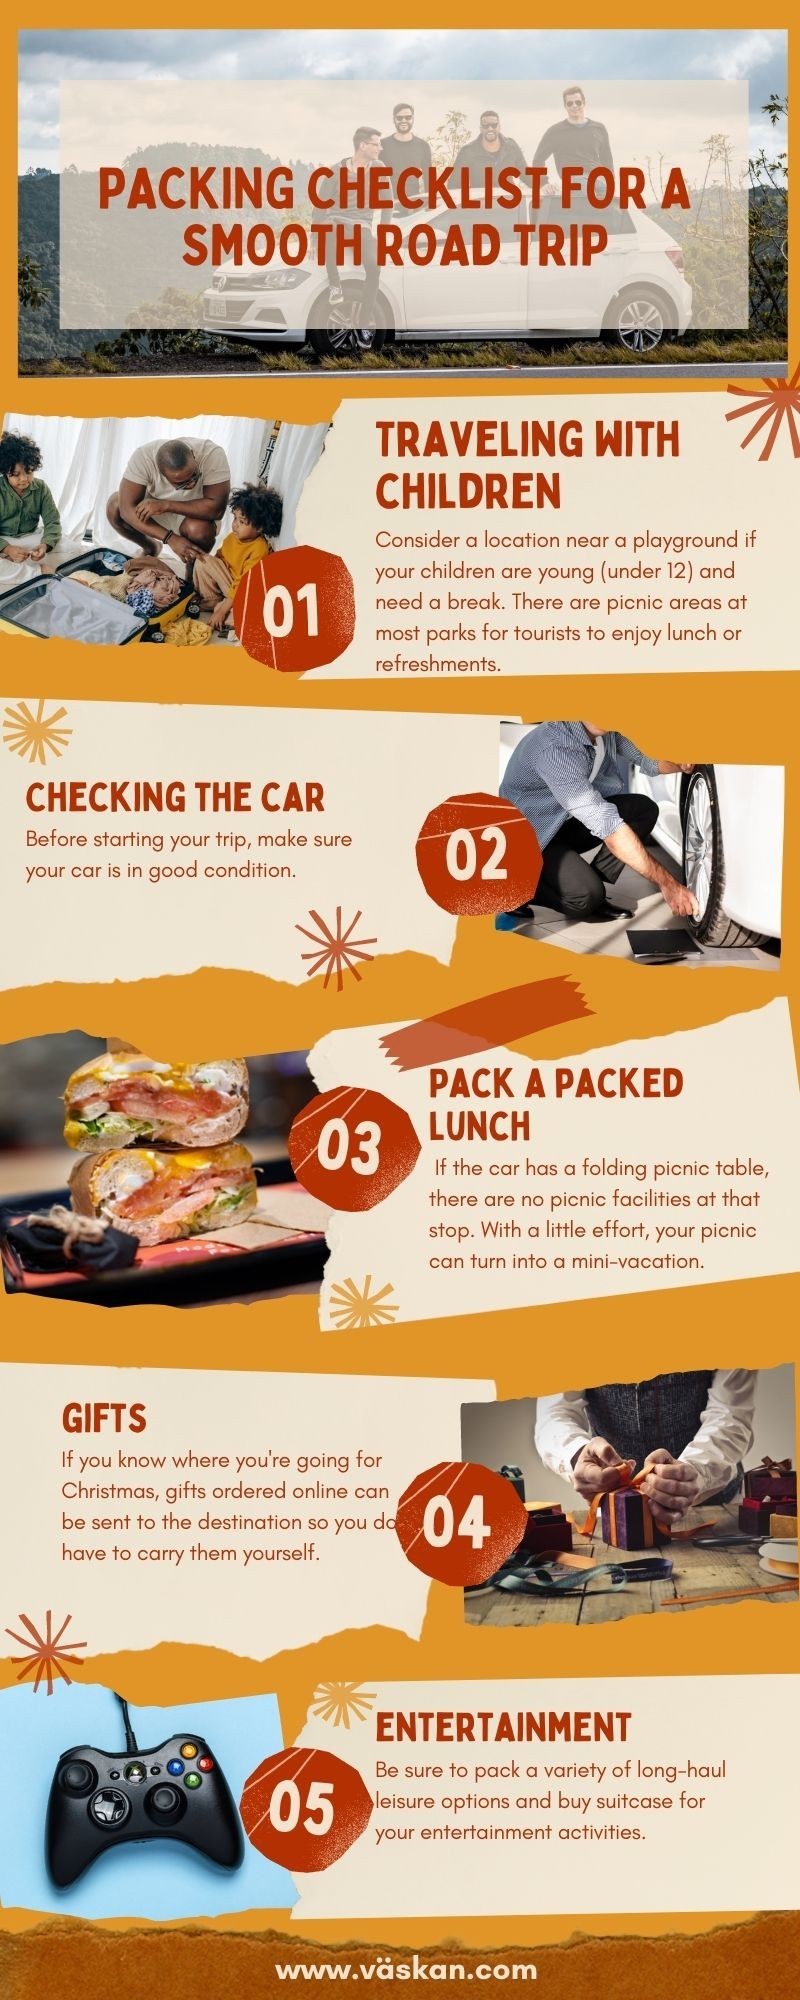 Packing Checklist for a Smooth Road Trip